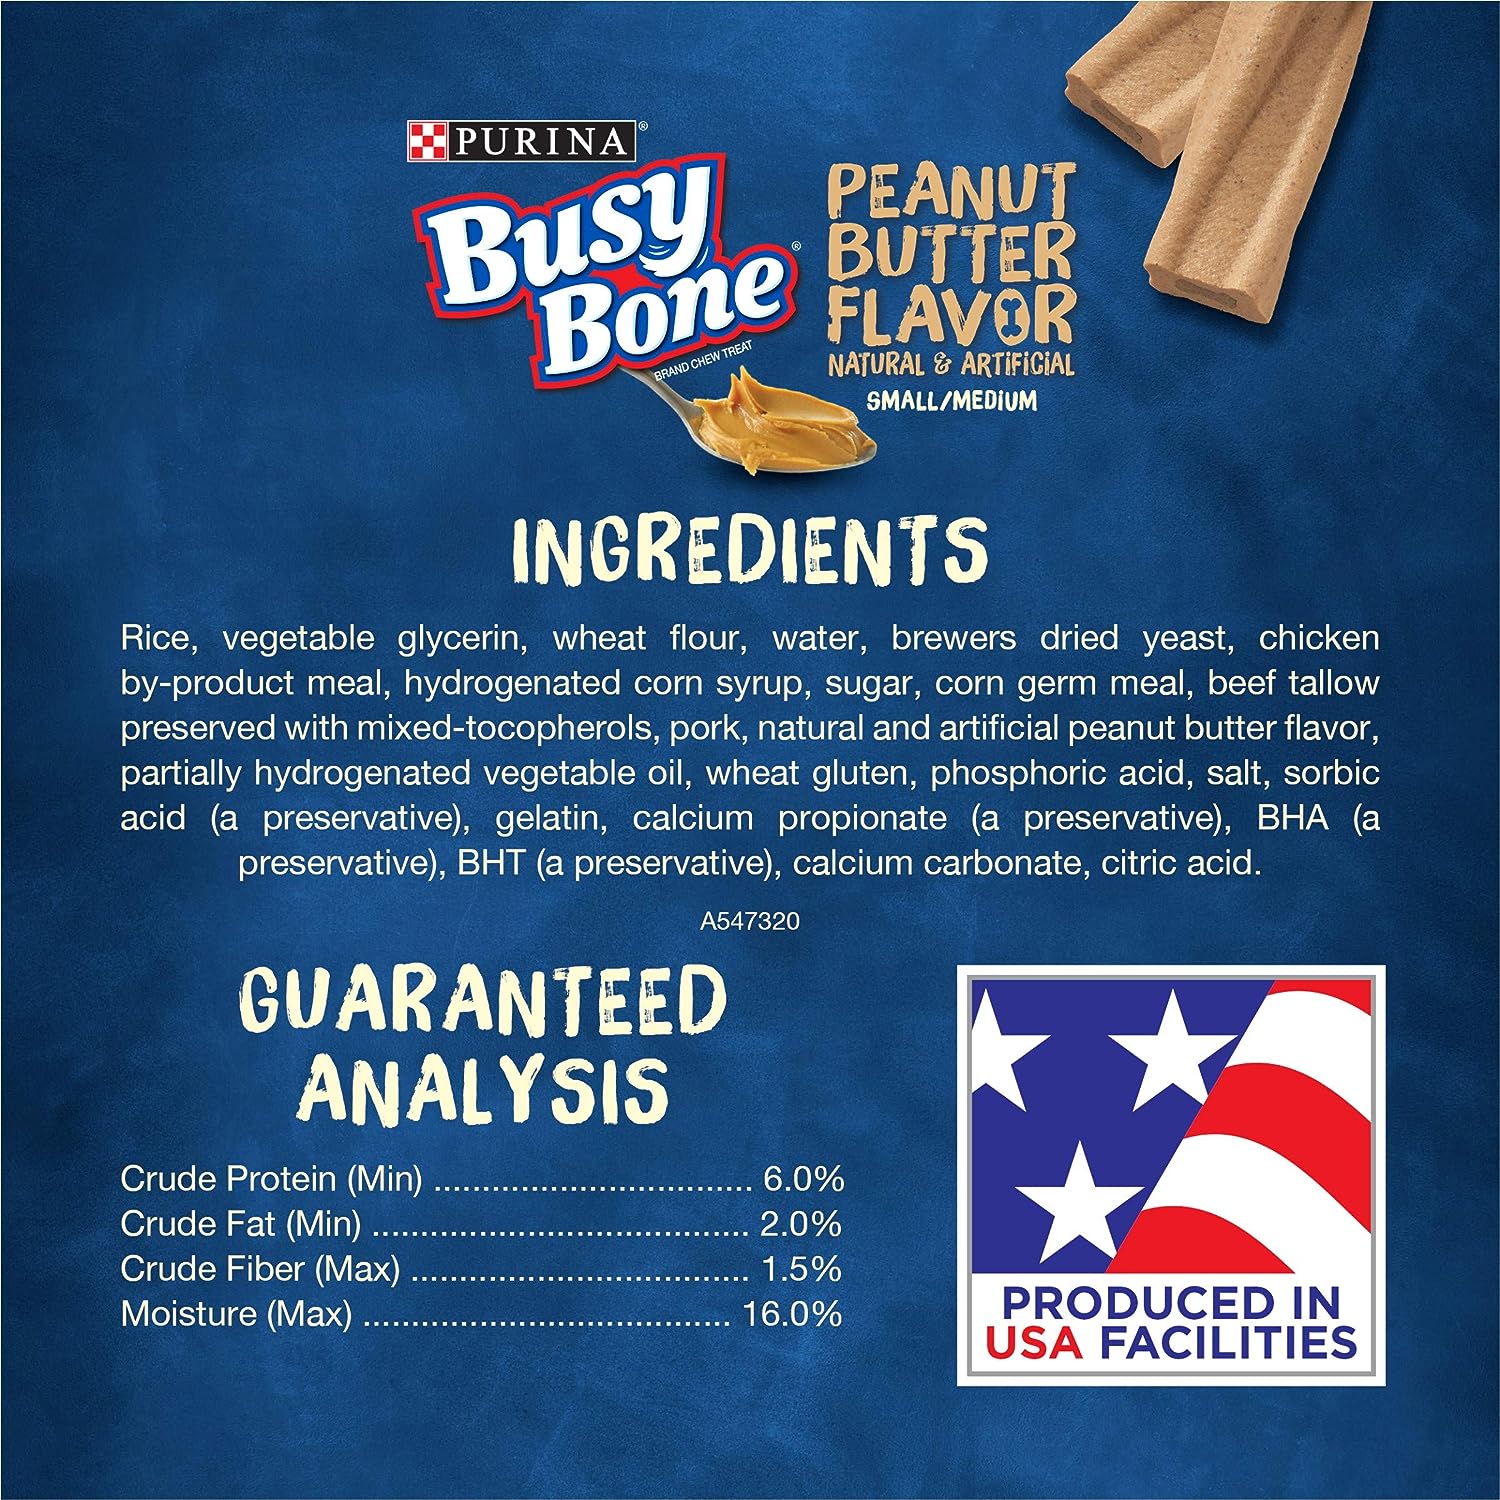 Purina Busy Bone Made in USA Facilities, Long Lasting Small/Medium Breed Adult Dog Chews, Peanut Butter Flavor - 10 ct. Pouch : Pet Supplies